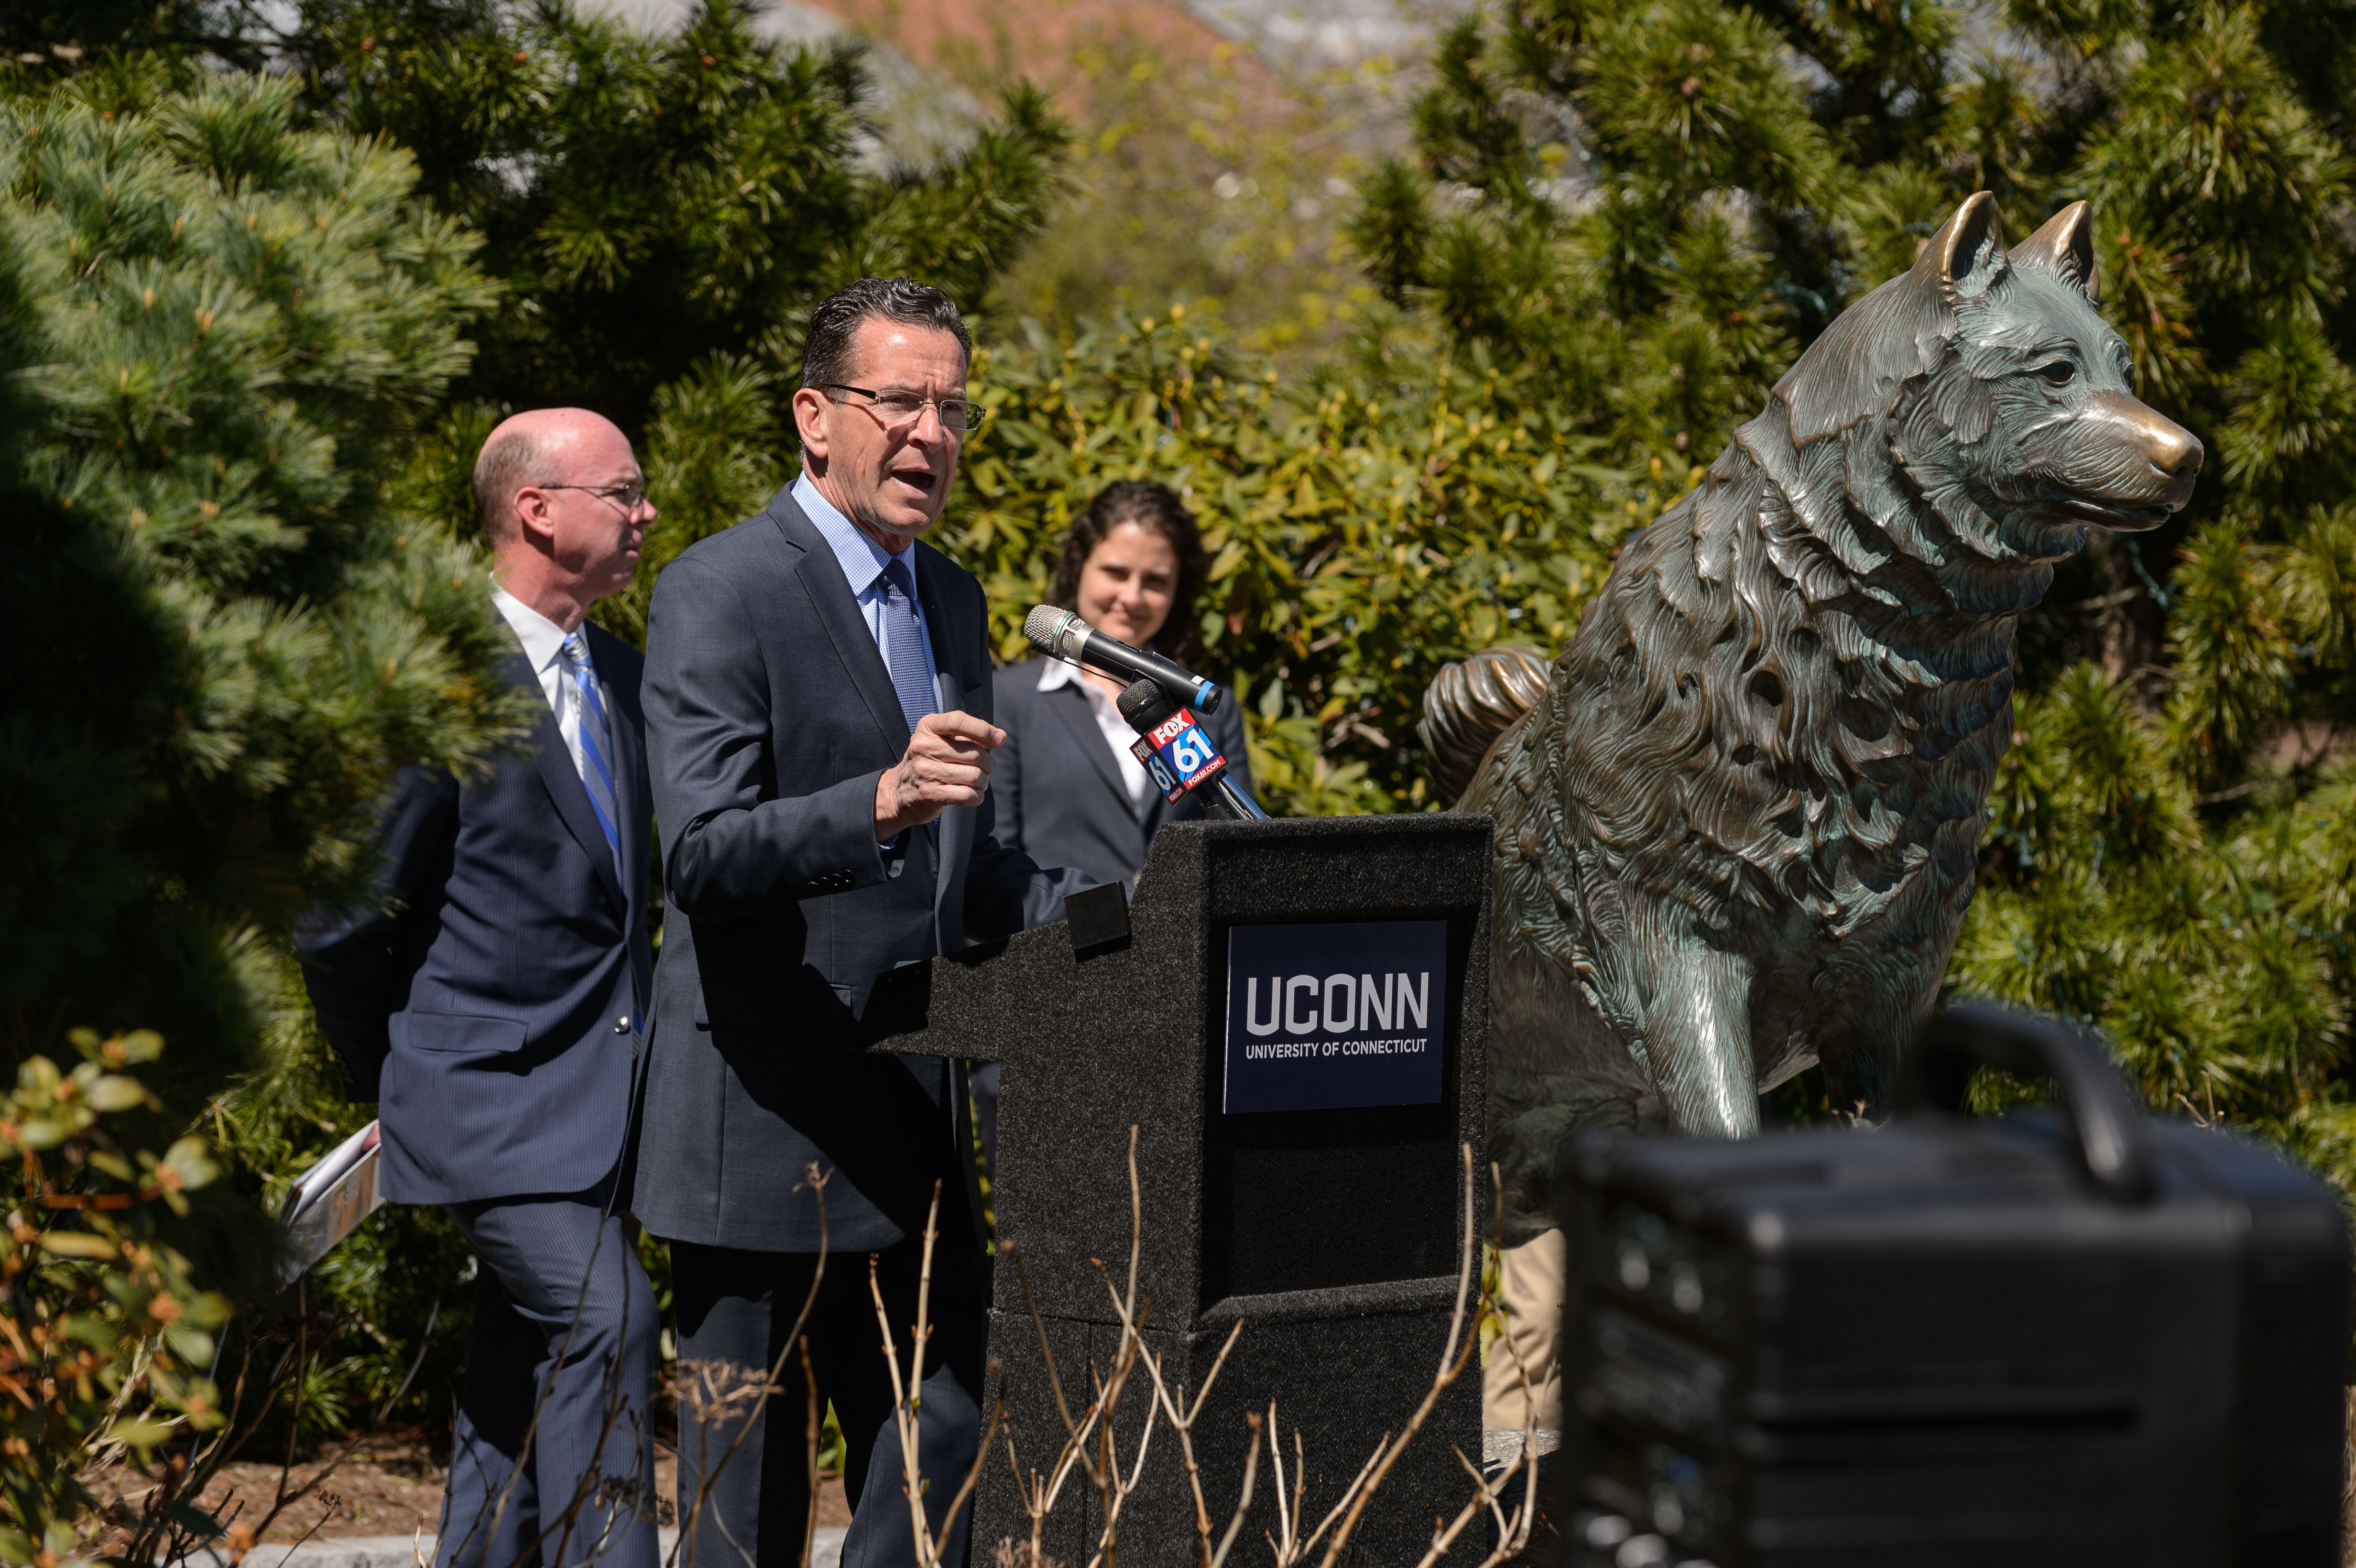 Gov. Dannel Malloy, center, speaks at a media event at the Wolff Family Park to recognize energy saving initiatives with Eversource on April 18, 2017. At left is Jim Hunt, senior vice-president for regulatory affairs at Eversource and Mary Sotos, deputy commissioner of DEEP. (Peter Morenus/UConn Photo)